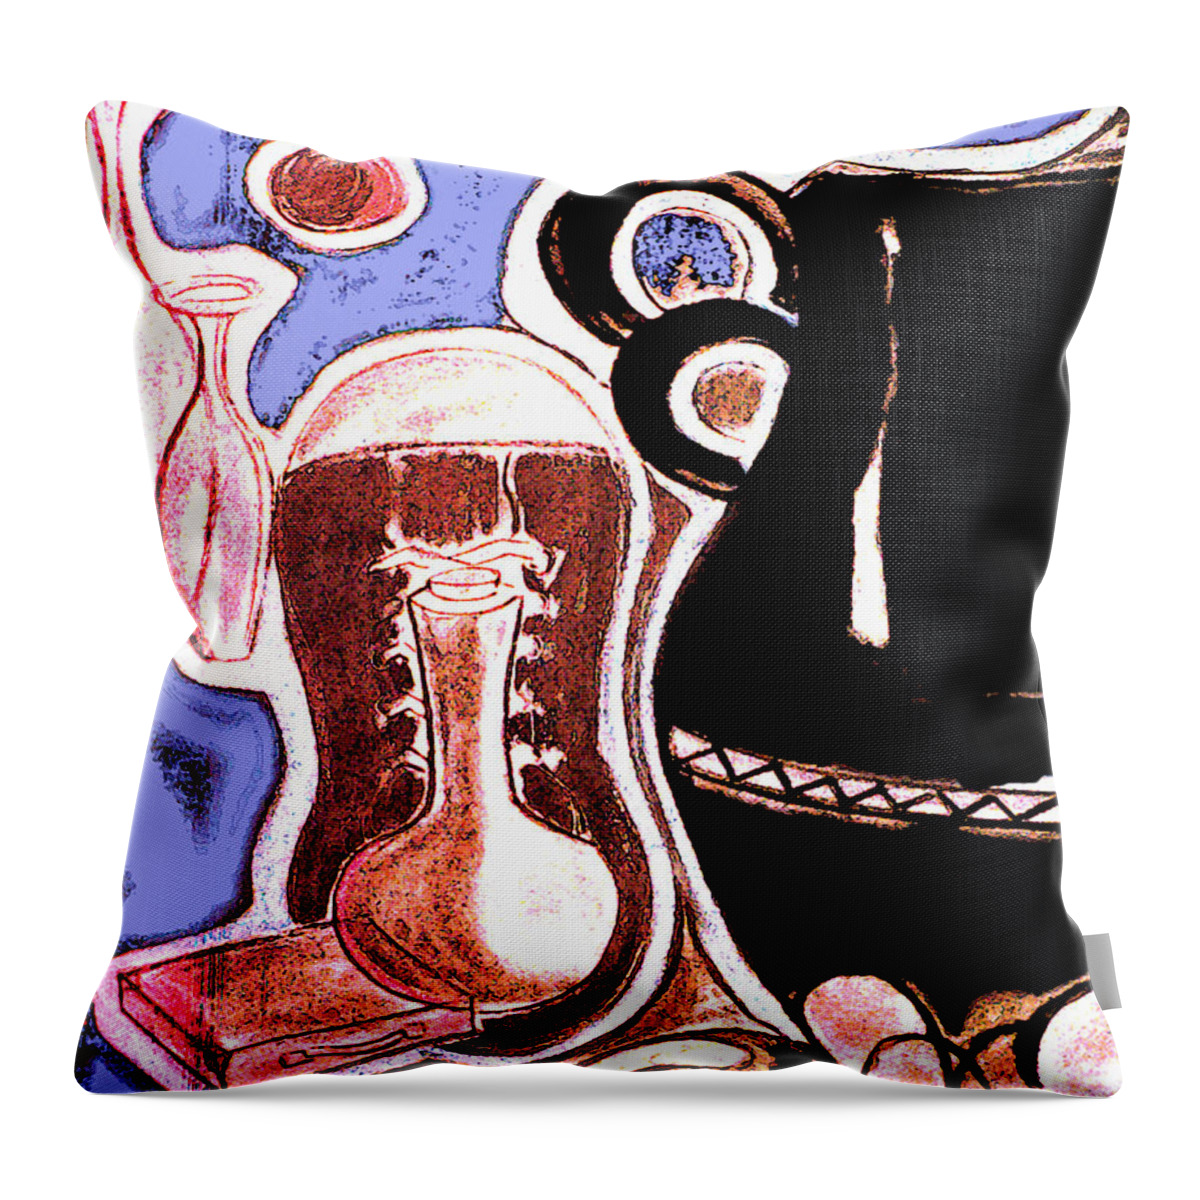 Boot Throw Pillow featuring the painting The Boot by Gloria Dietz-Kiebron